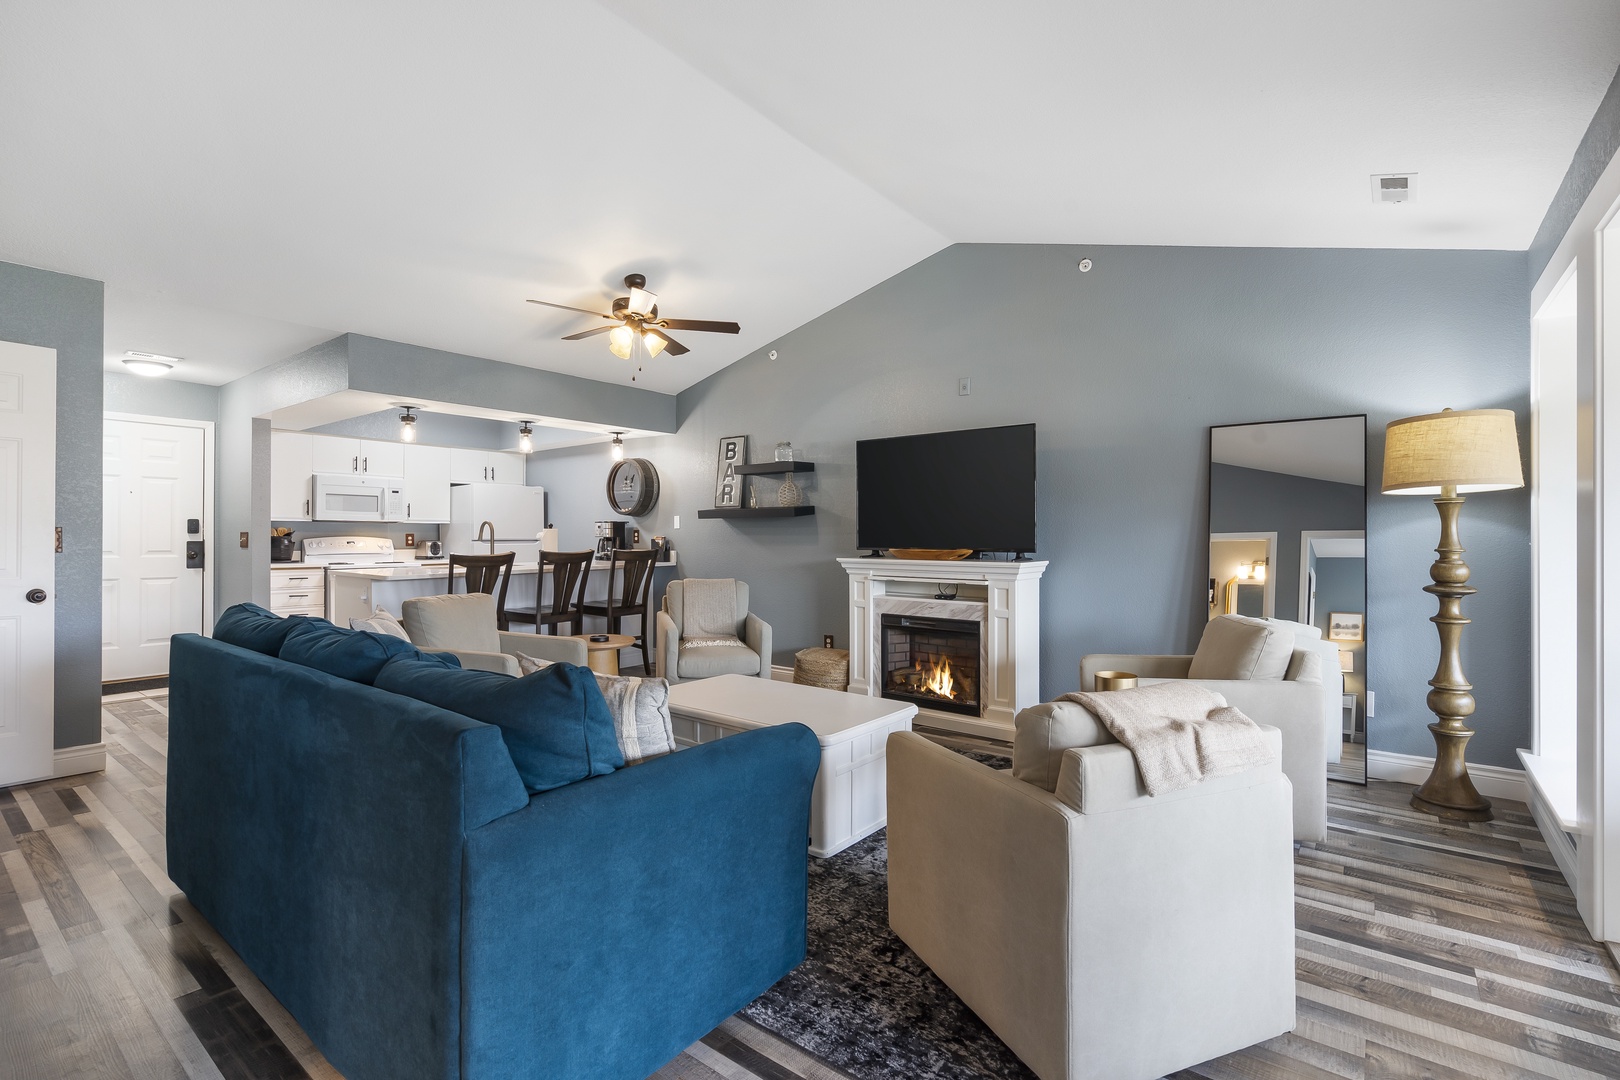 Curl up in the airy living room & enjoy a movie night by the electric fireplace